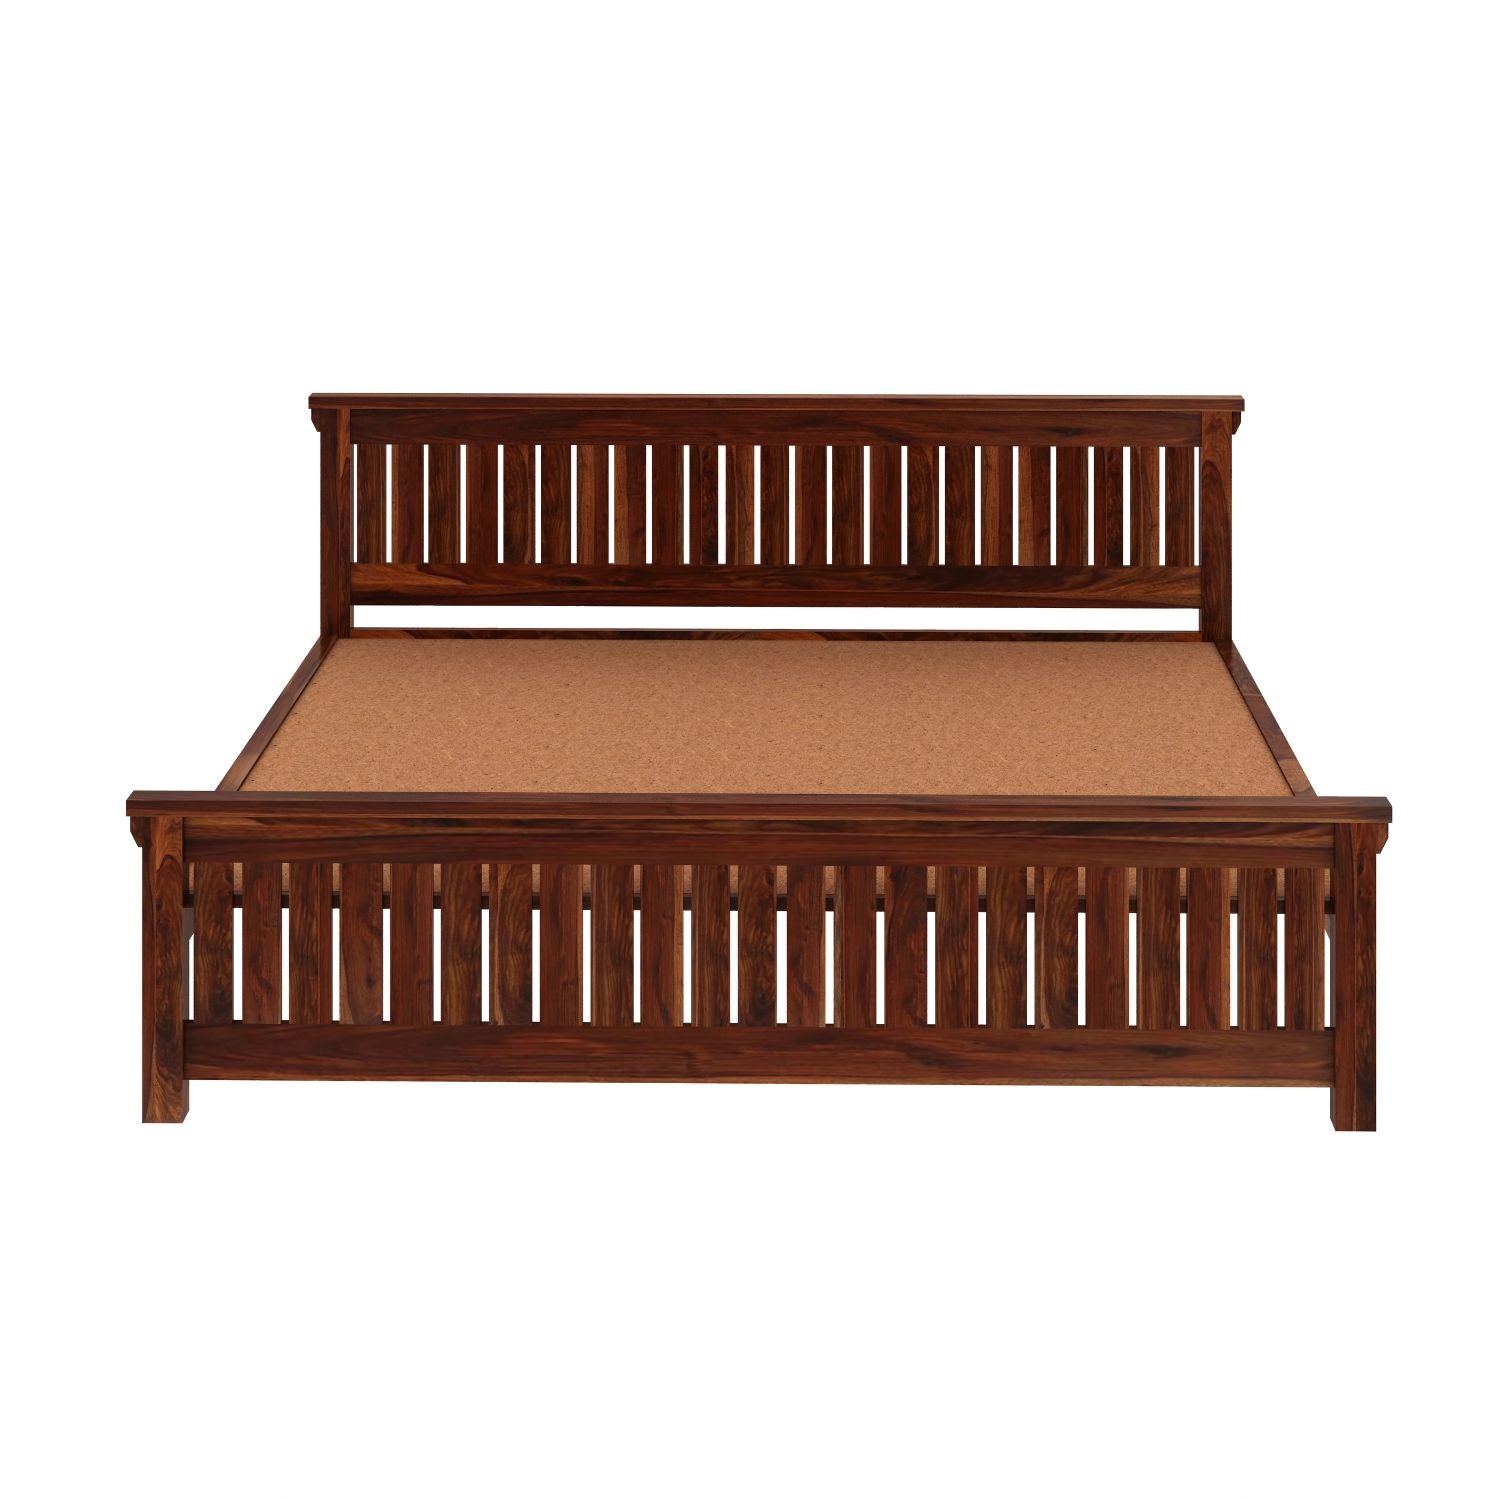 Trinity Solid Sheesham Wood Bed Without Storage (King Size, Natural Finish)